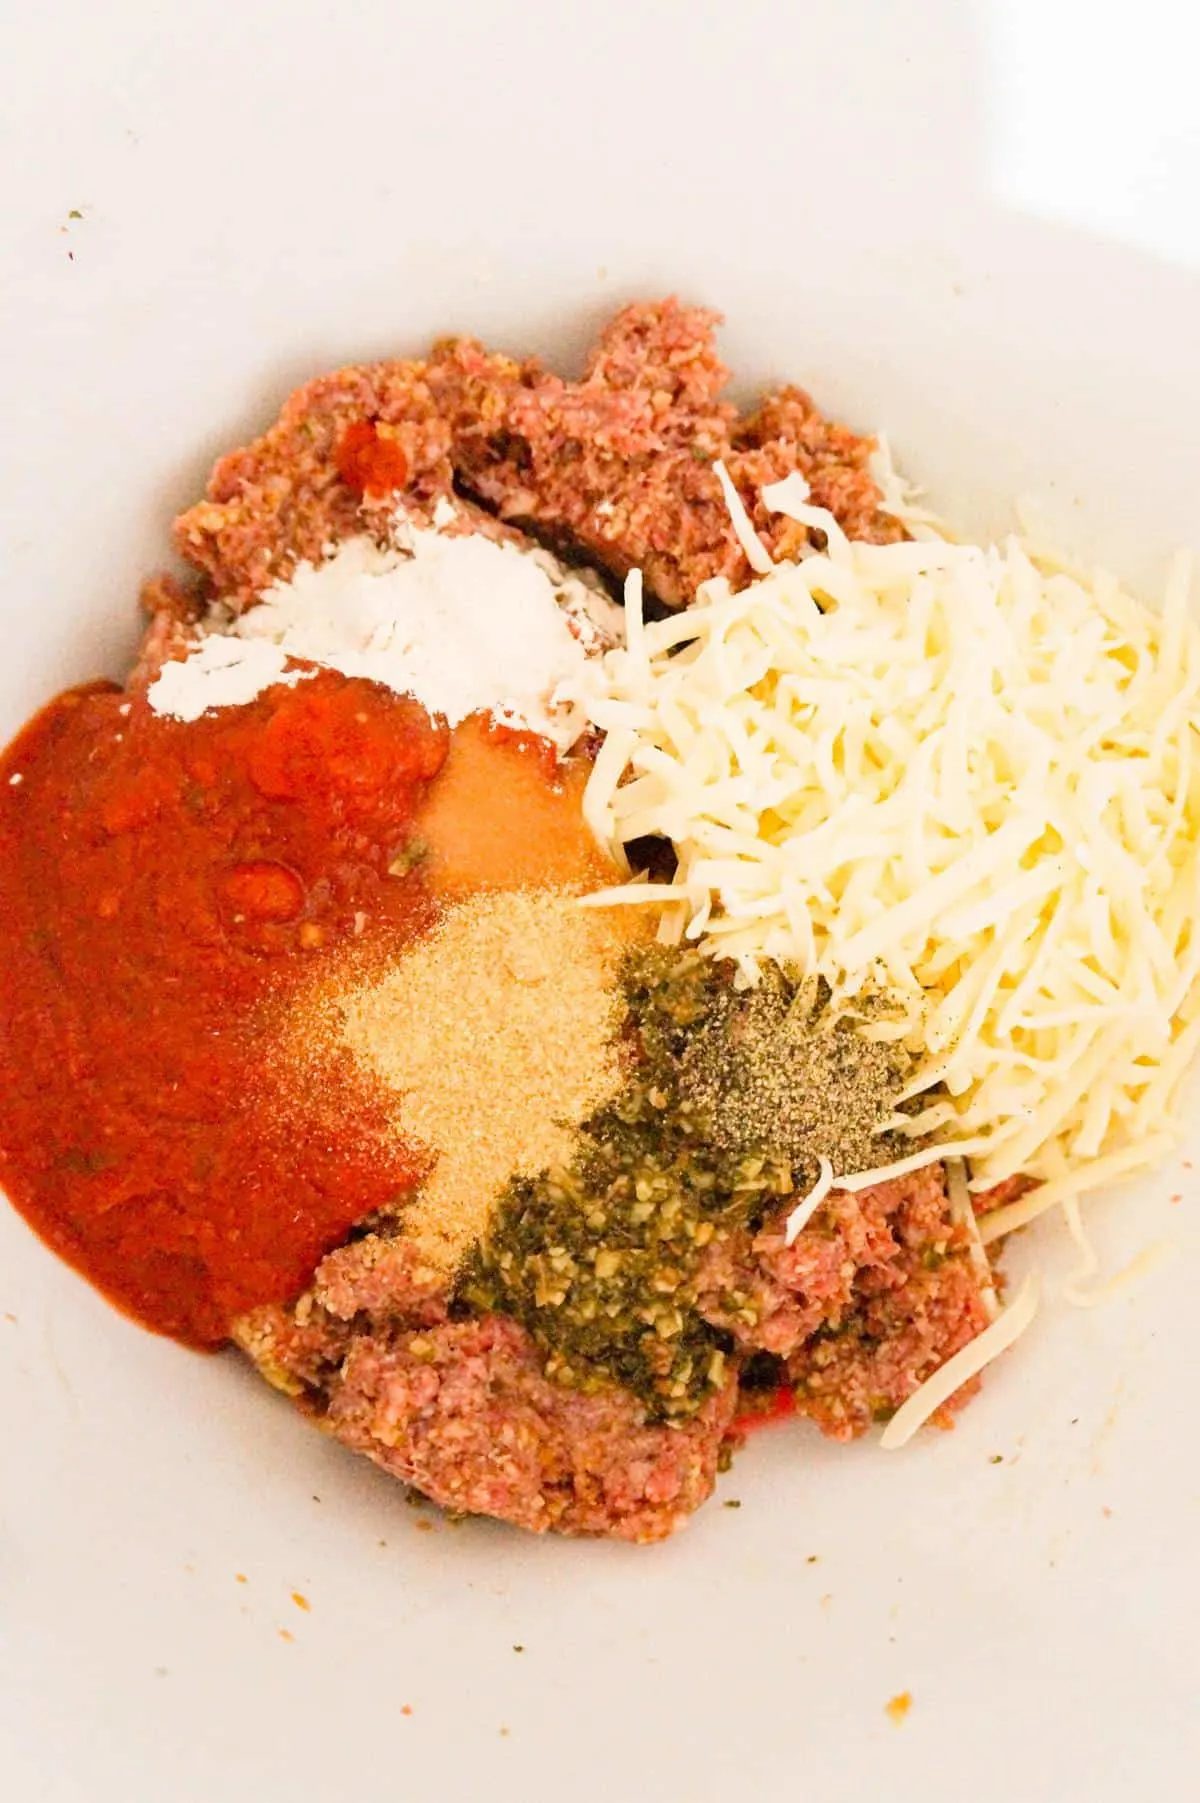 spices, shredded cheese and marinara sauce on top of ground beef mixture in a mixing bowl